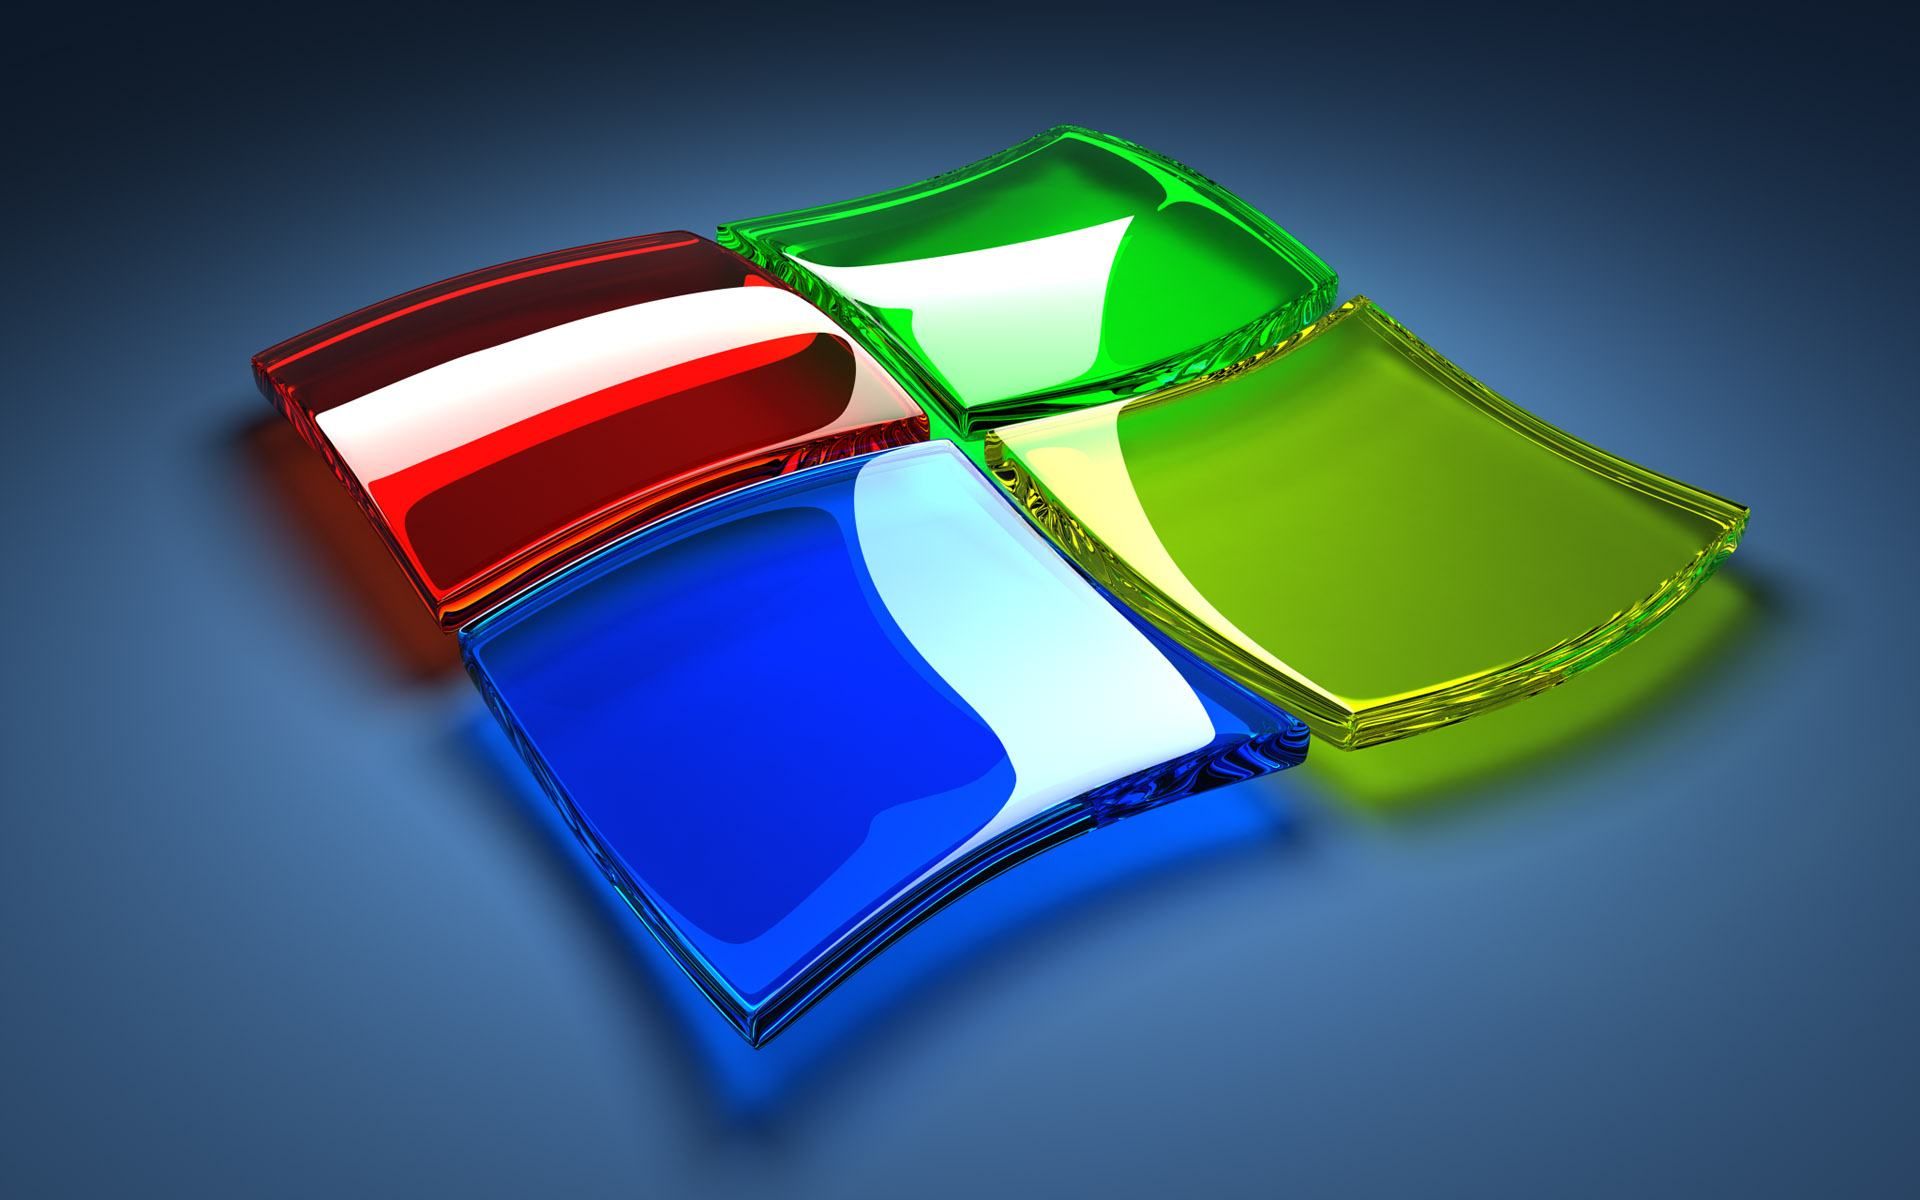 7 Best Desktop And Windows 8 Animated 3D Wallpapers - Birthday